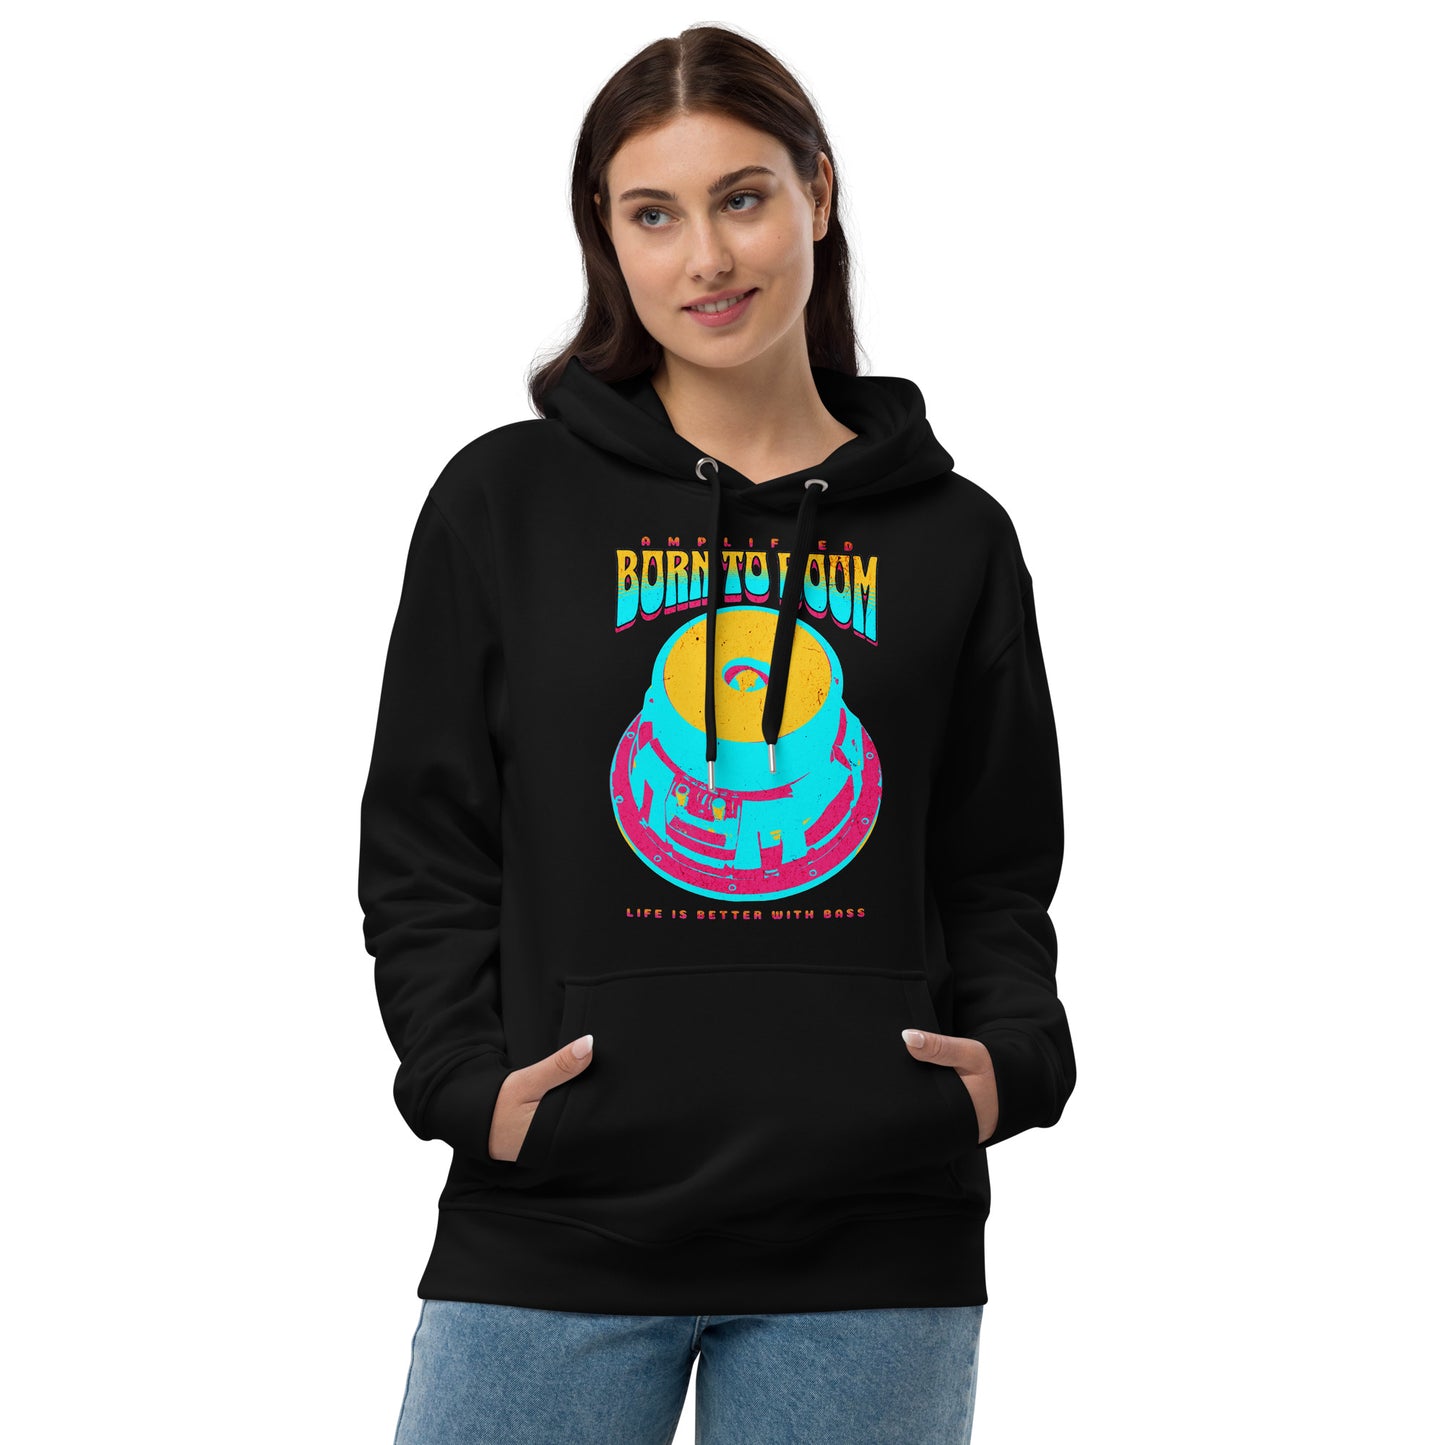 Born to Boom Hoodie